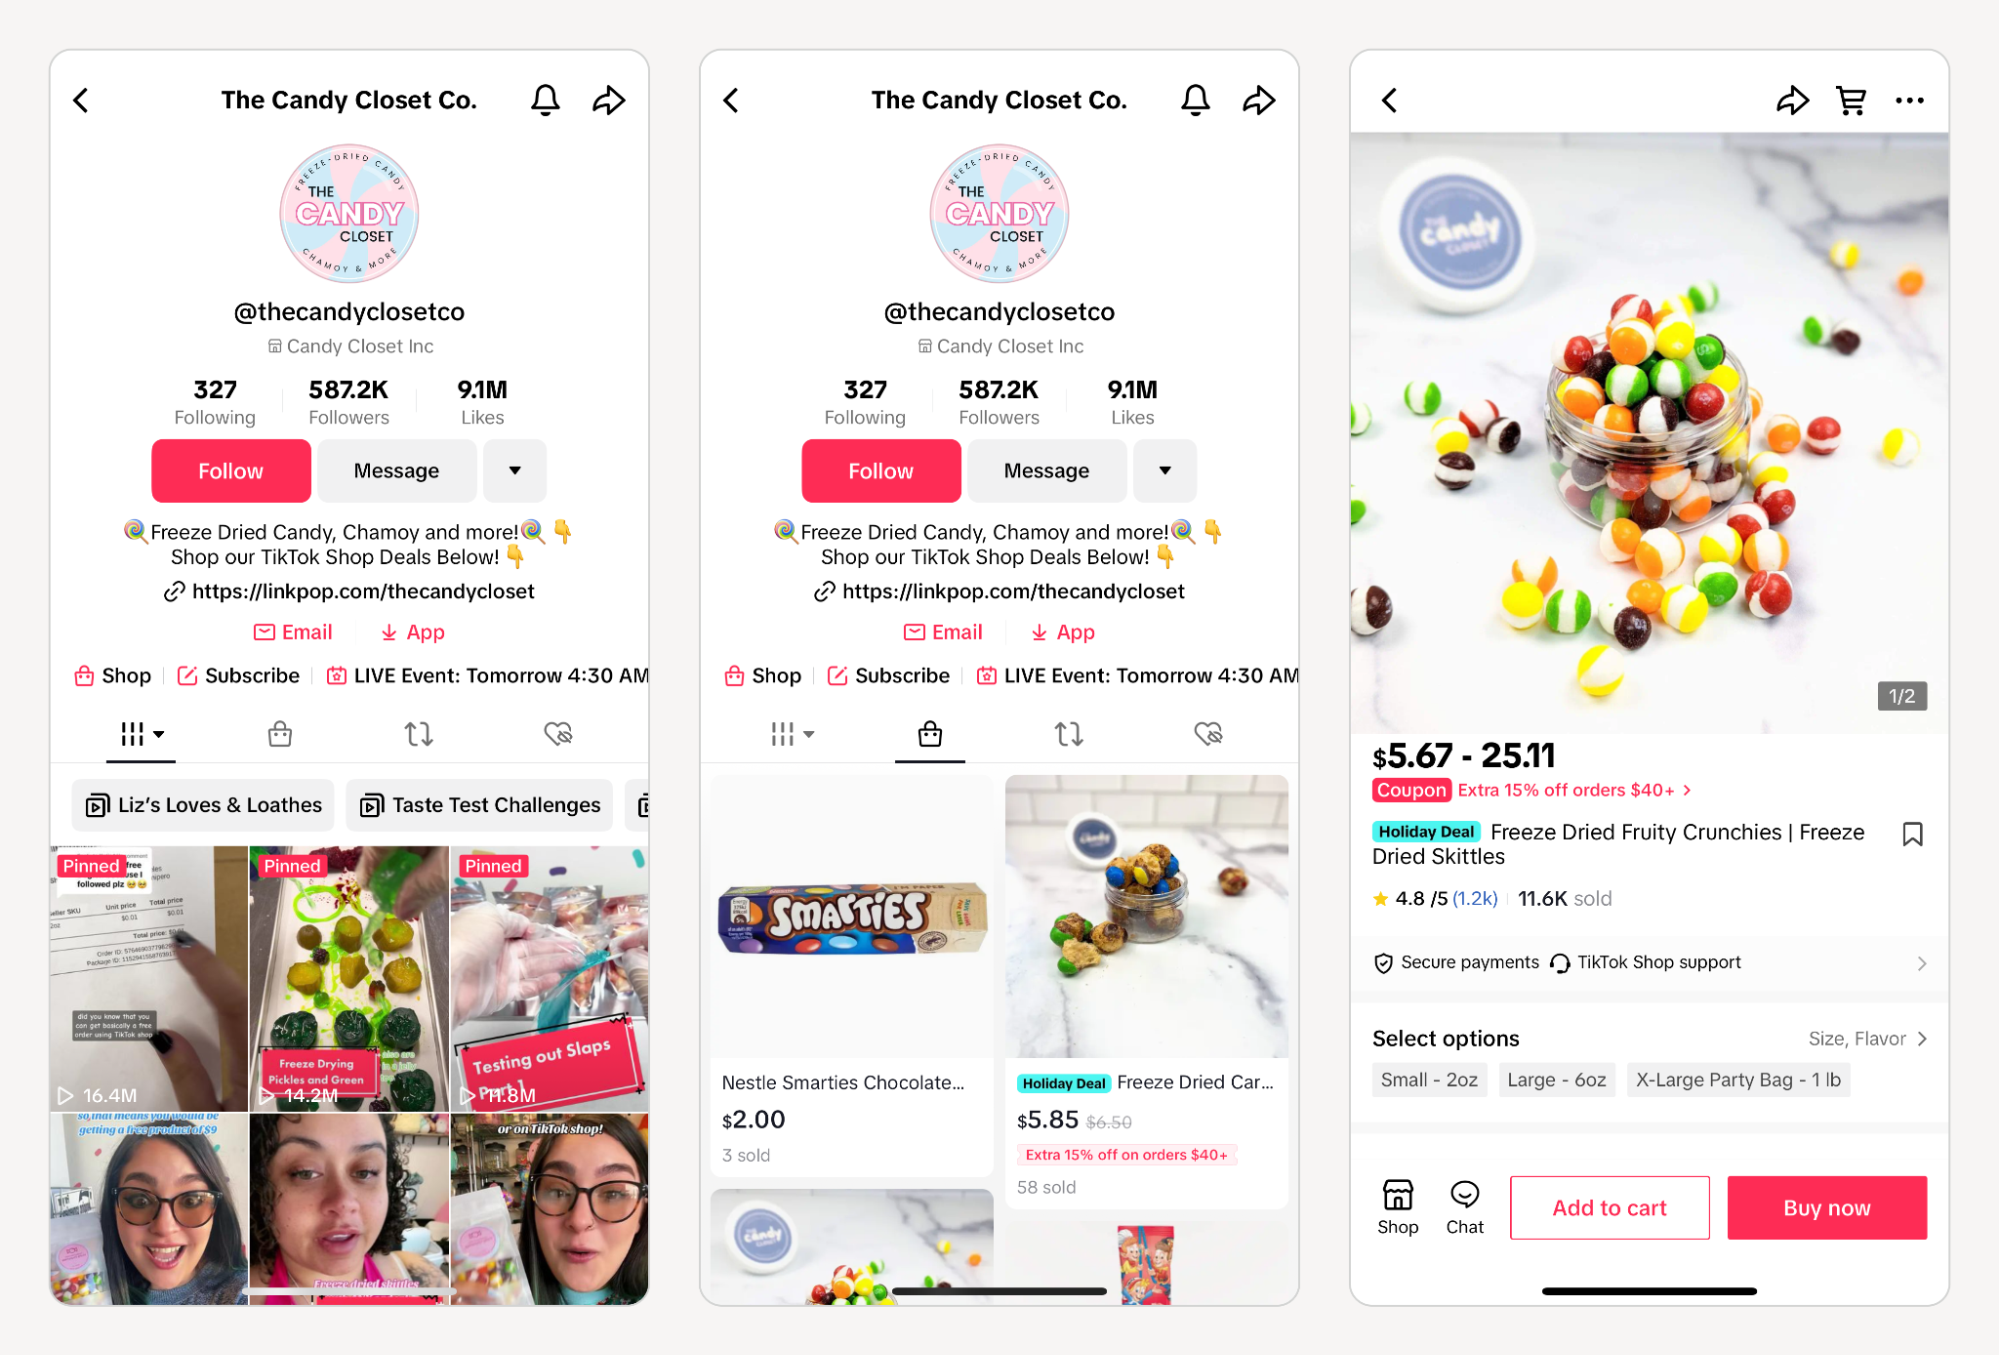 Product Showcase lets users browse all of your products from your profile